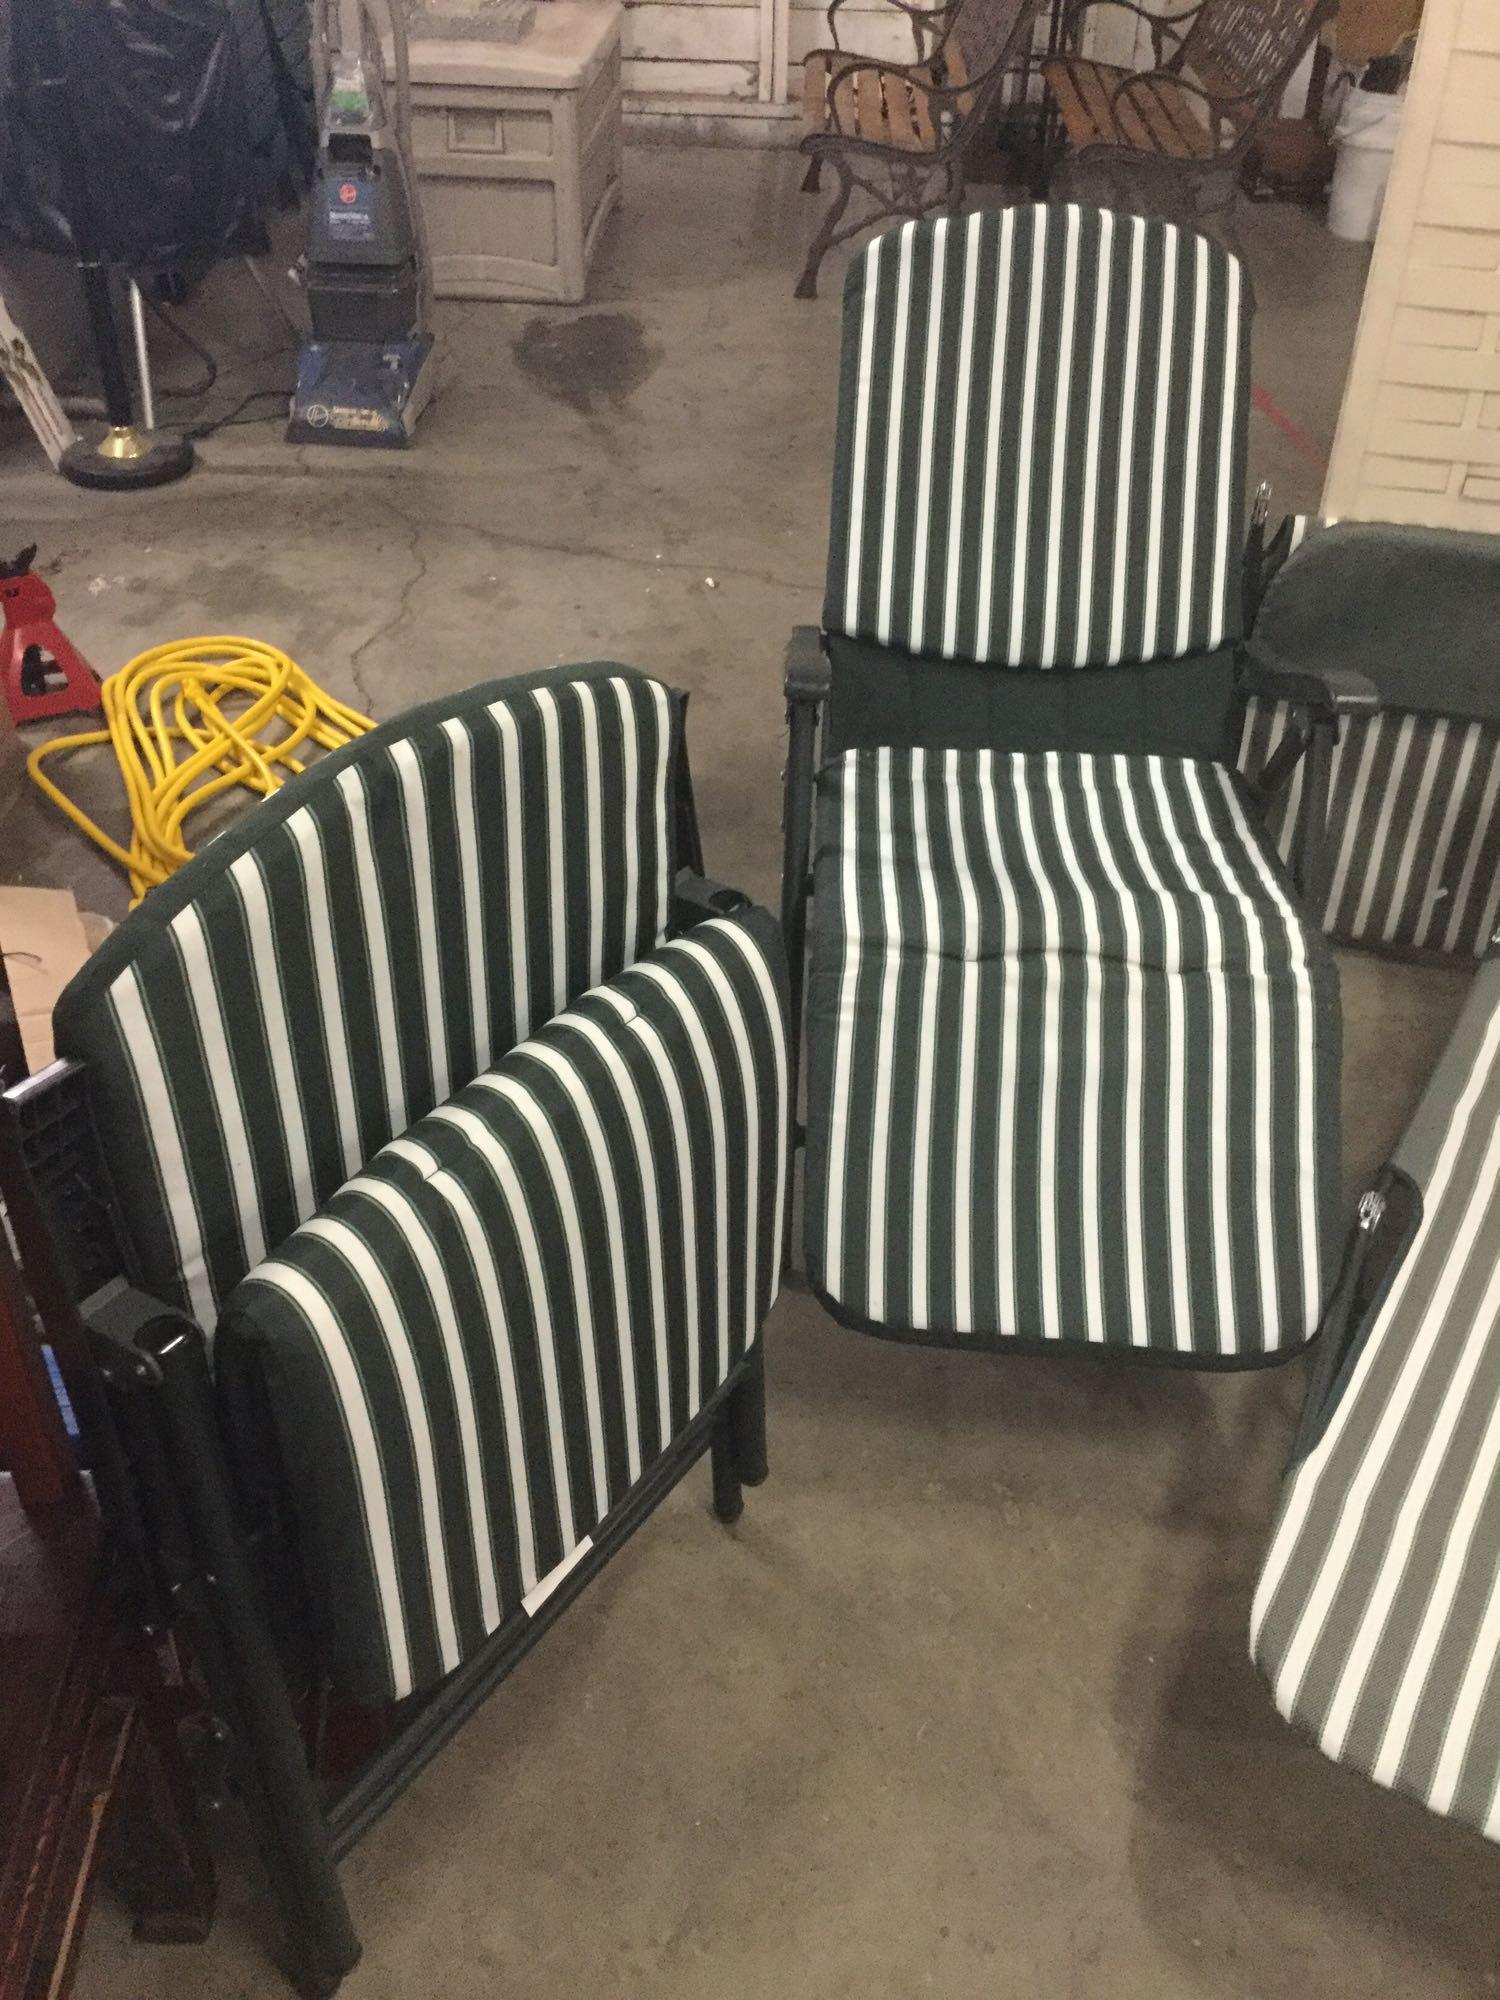 Lot of 6 lawn chairs in different designs - chairs and loungers 4 padded like new